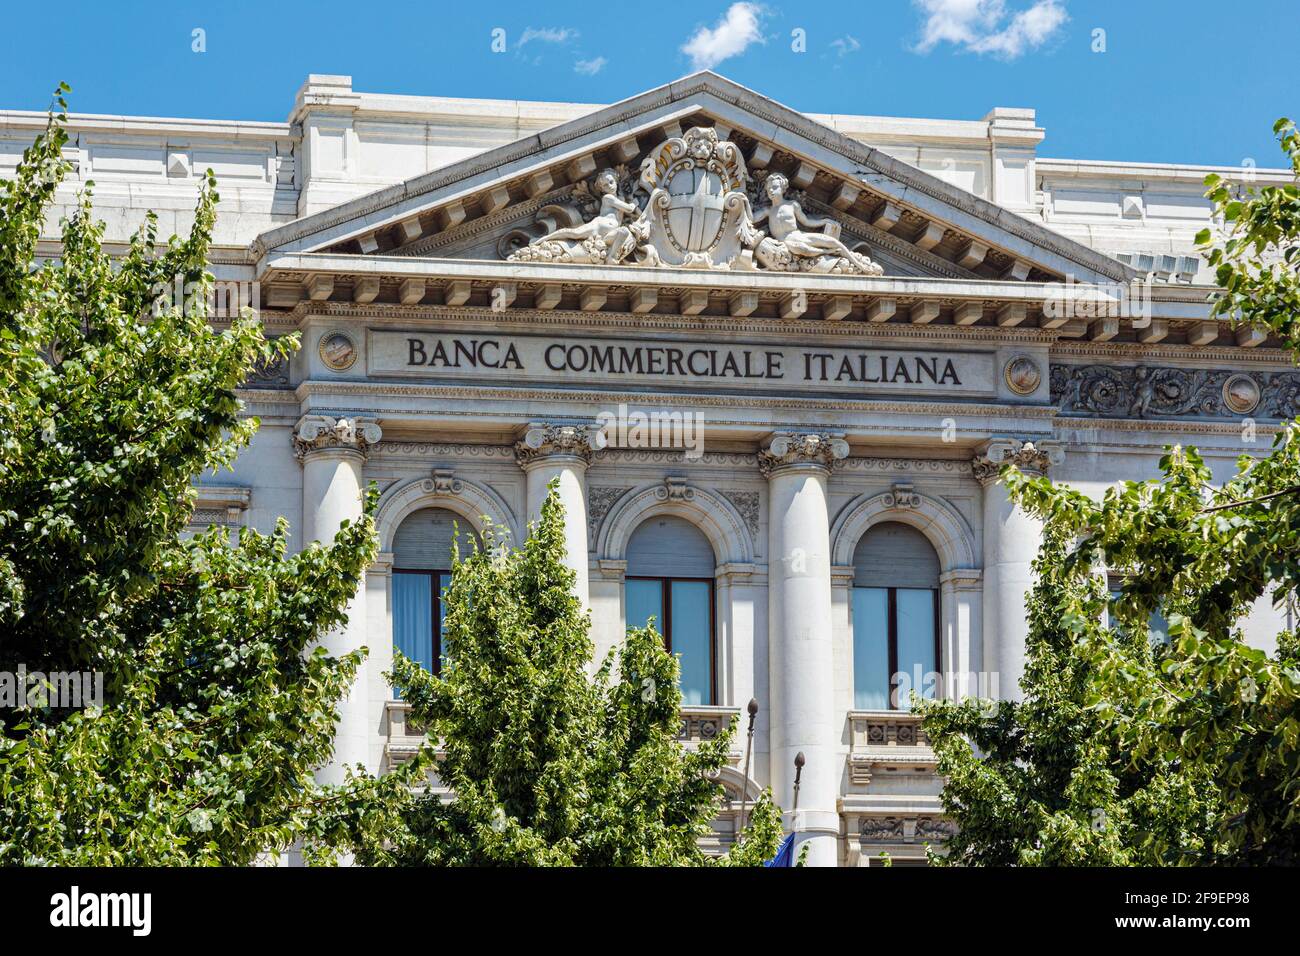 Milan, Milan Province, Lombardy, Italy.  Palazzo della Banca Commerciale Italiana or Palace of the Banca Commerciale Italiana, Piazza della Scala. Stock Photo